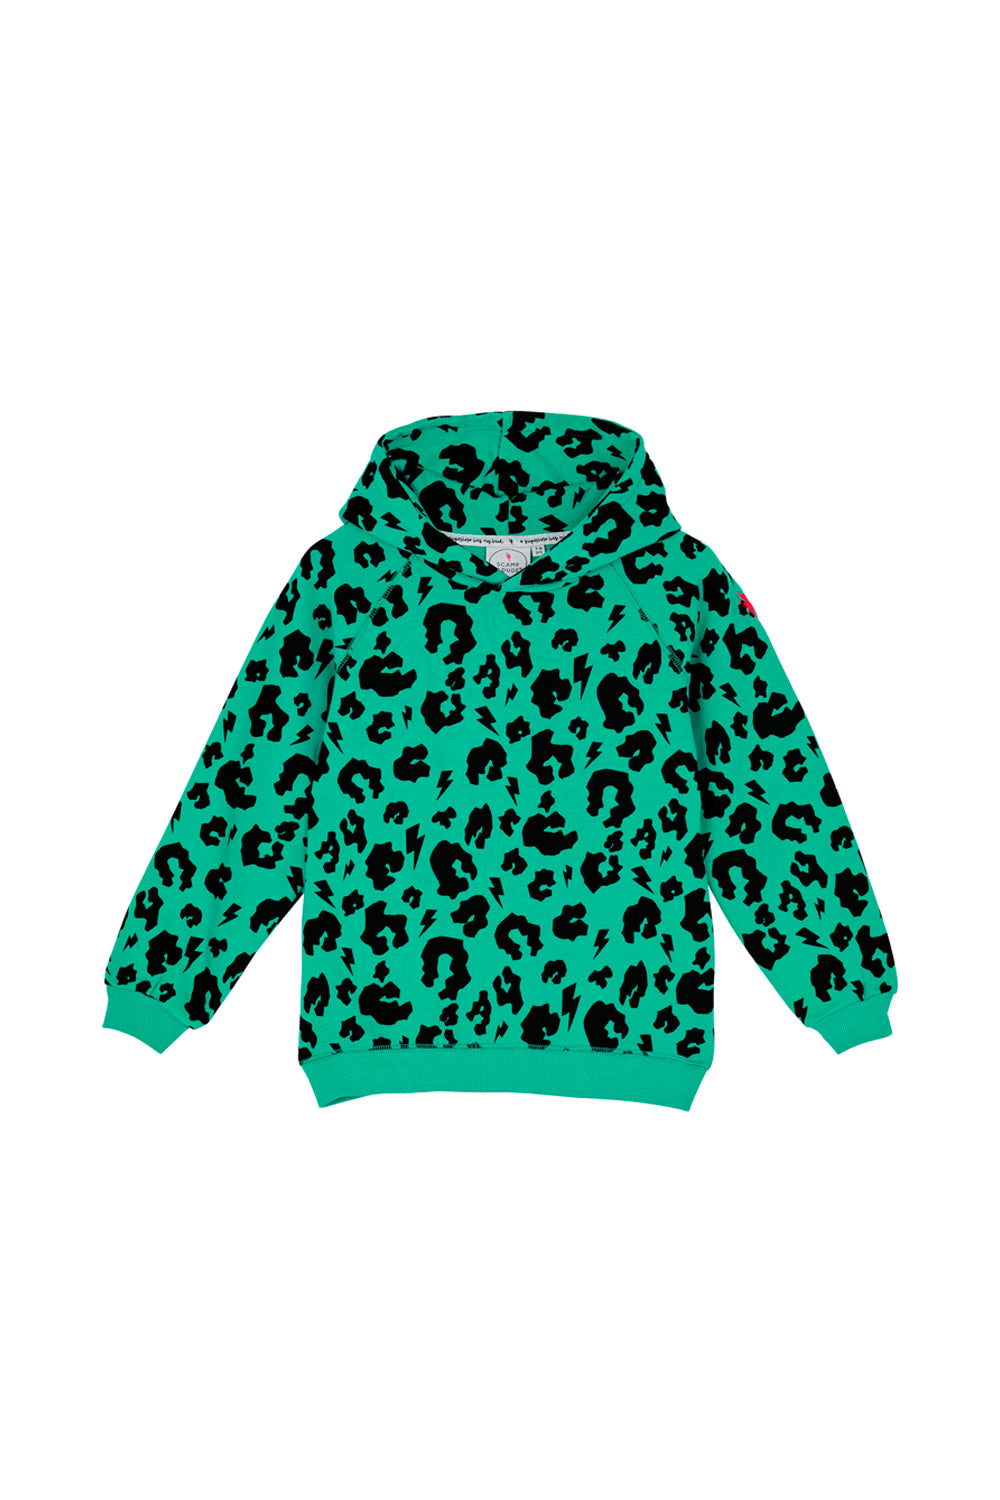 Kids Bright Green with Black Leopard Hoodie